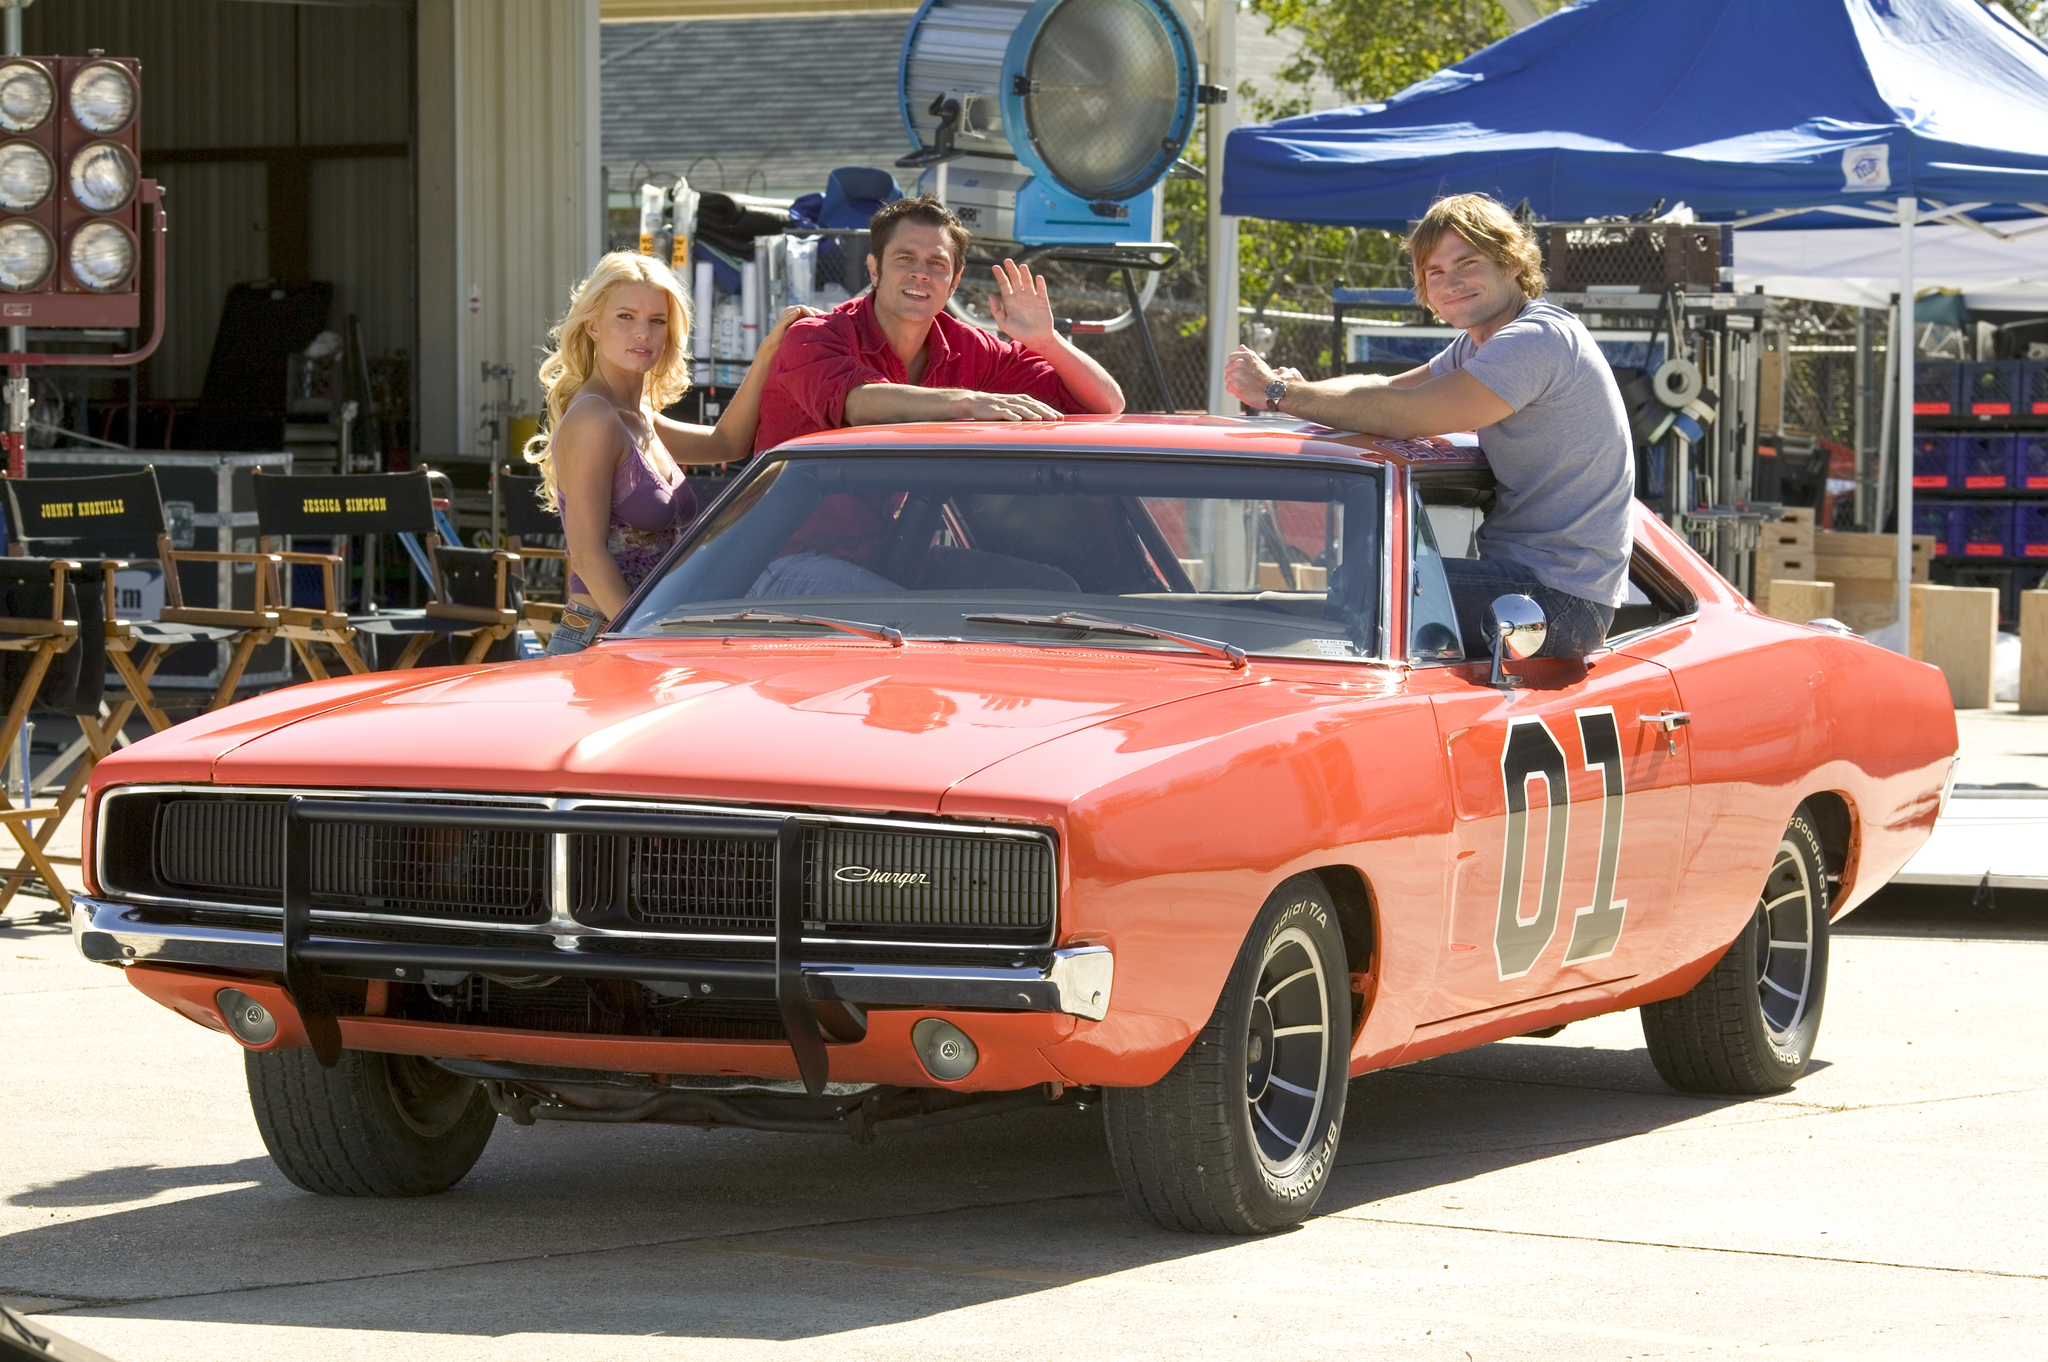 Still of Seann William Scott, Jessica Simpson and Johnny Knoxville in The Dukes of Hazzard (2005)